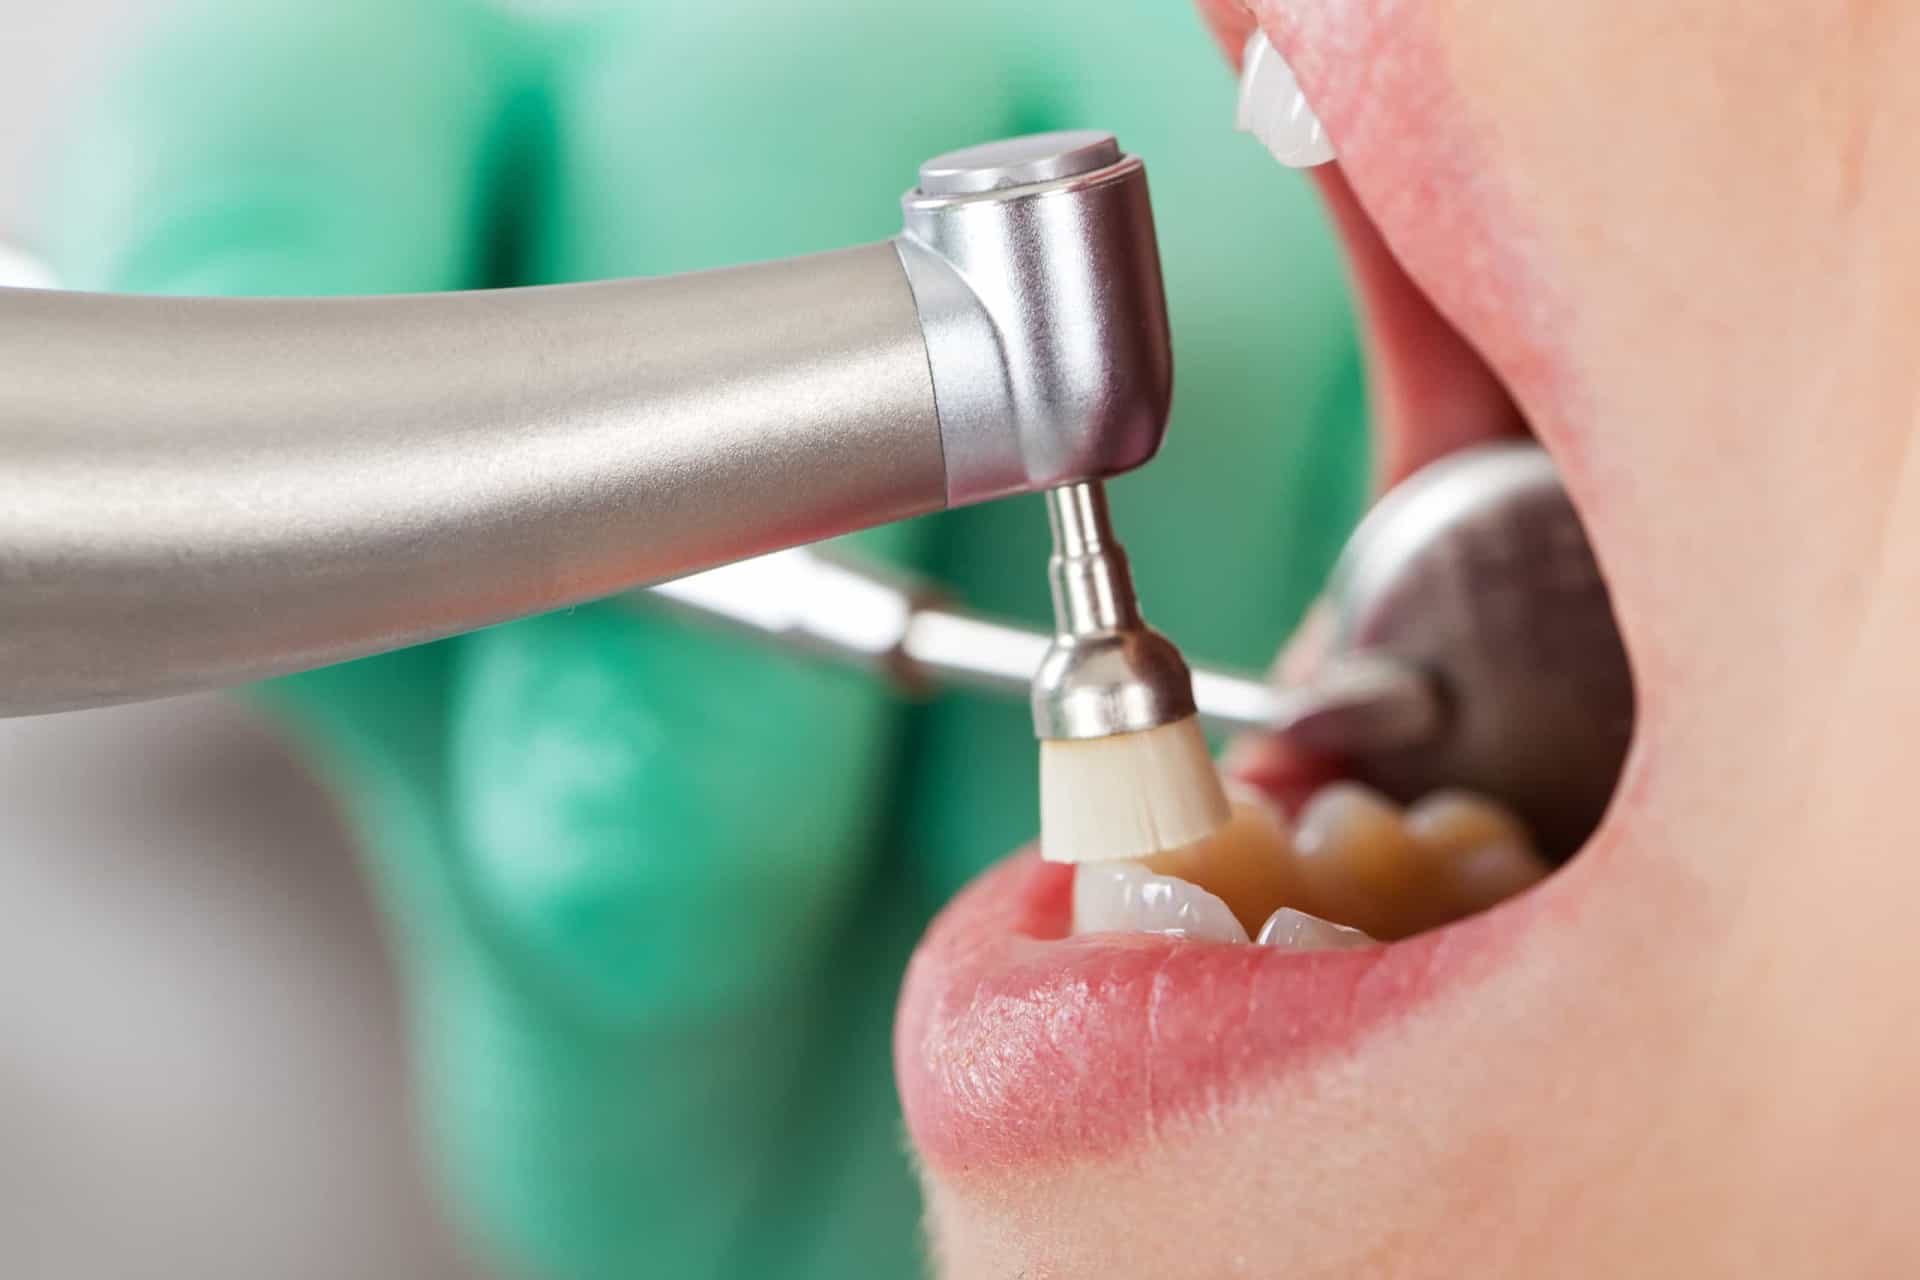 <p>“This will prevent food debris from lodging in your teeth, which can irritate you during a cleaning and give your dentist a little extra work to do," says doctor of dental surgery Gregory Skeens.</p><p><a href="https://www.msn.com/en-us/community/channel/vid-7xx8mnucu55yw63we9va2gwr7uihbxwc68fxqp25x6tg4ftibpra?cvid=94631541bc0f4f89bfd59158d696ad7e">Follow us and access great exclusive content everyday</a></p>